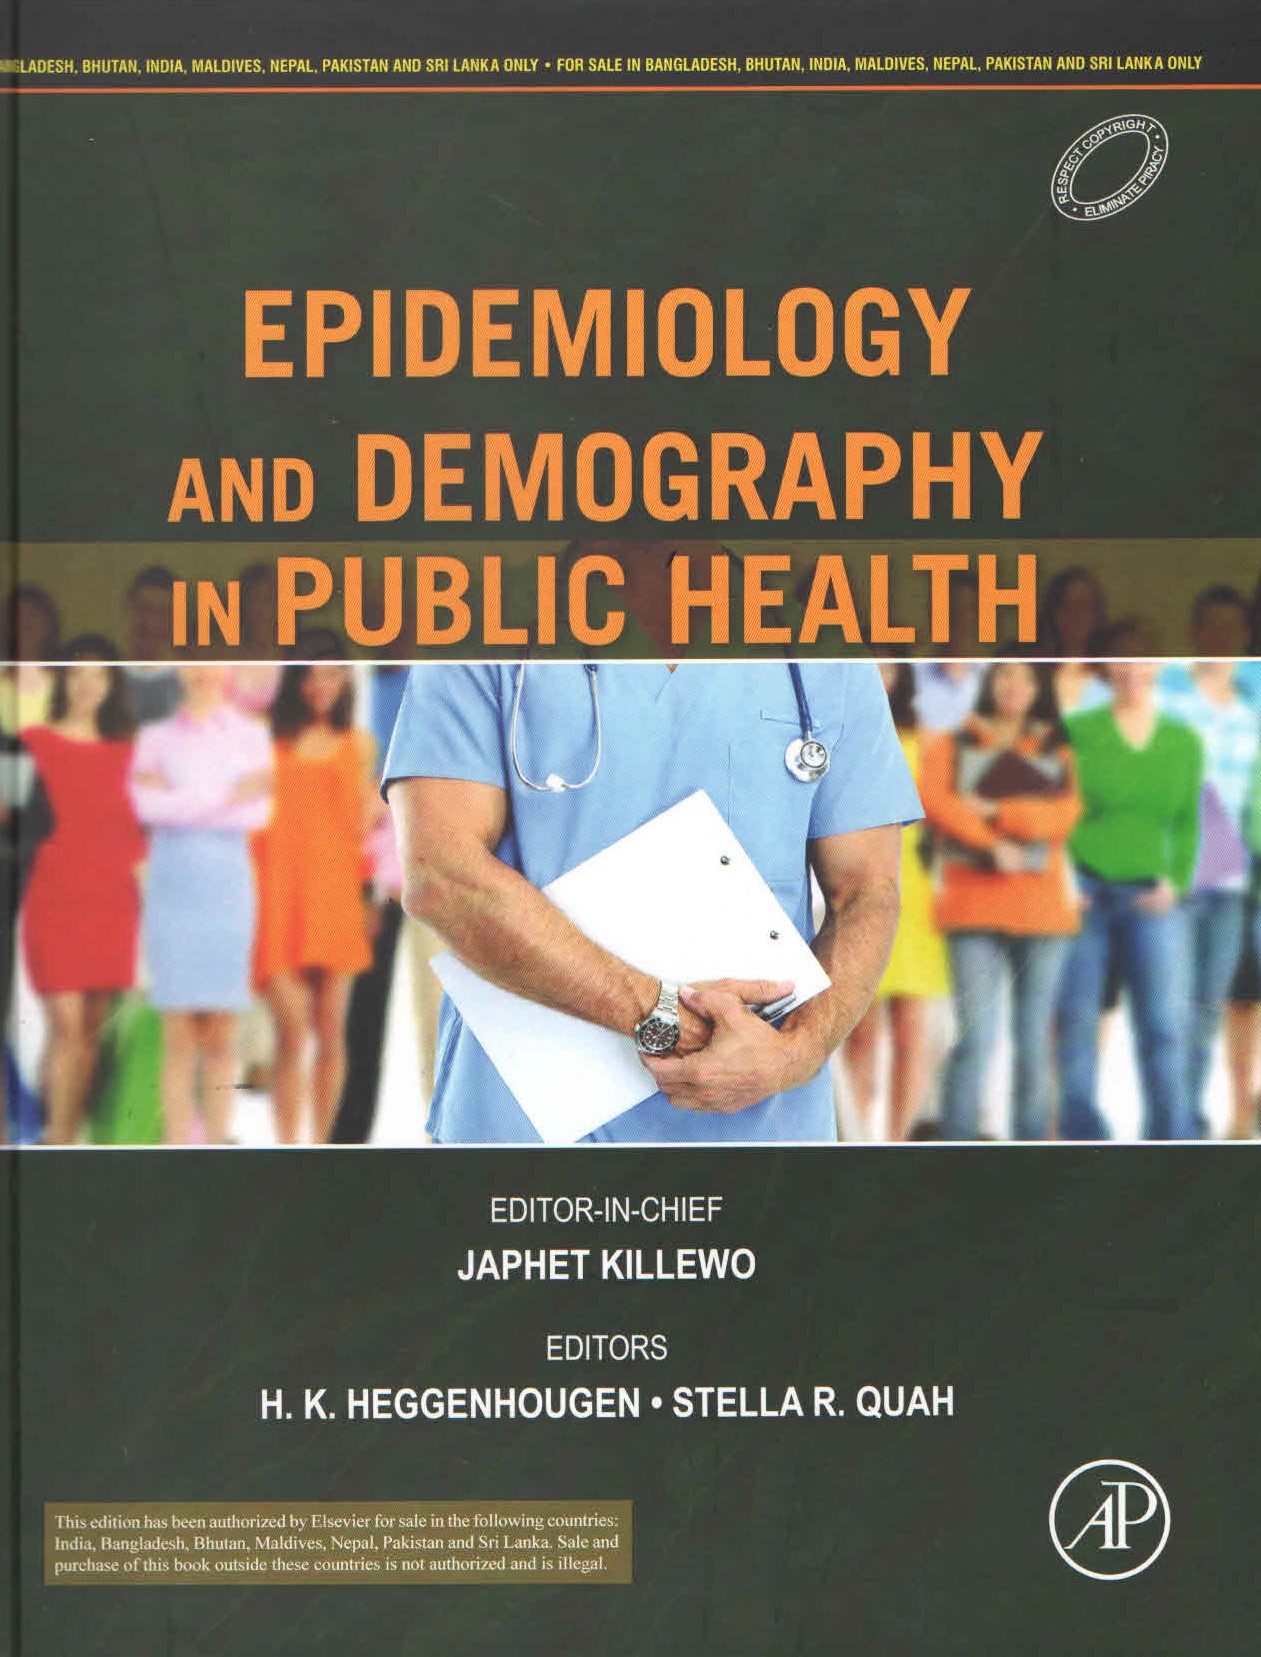 

exclusive-publishers/elsevier/epidemiology-and-demography-in-public-health-9788131269640